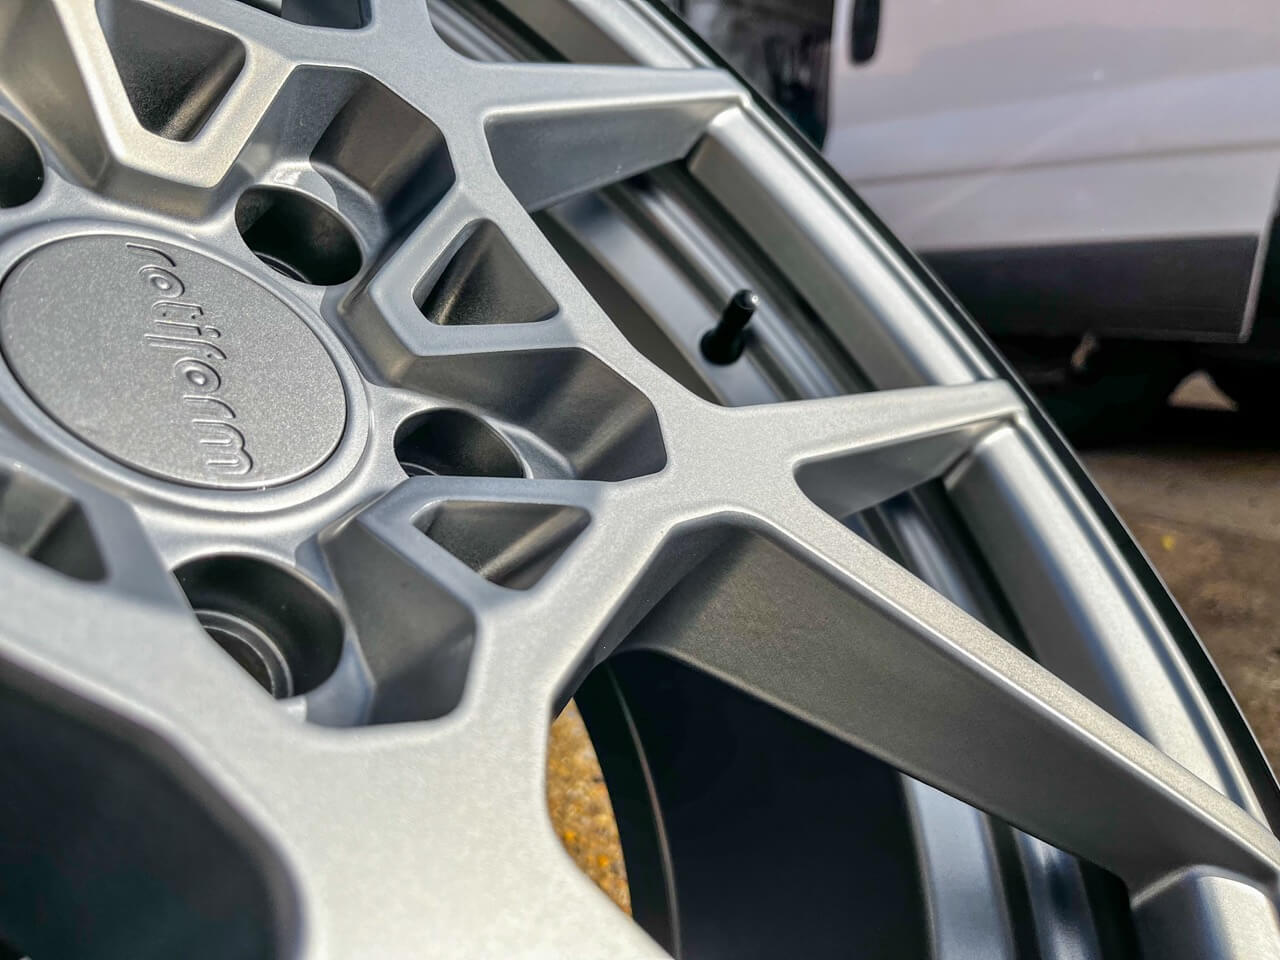 Close up of the ceramic coated Rotiform alloy wheels in gray